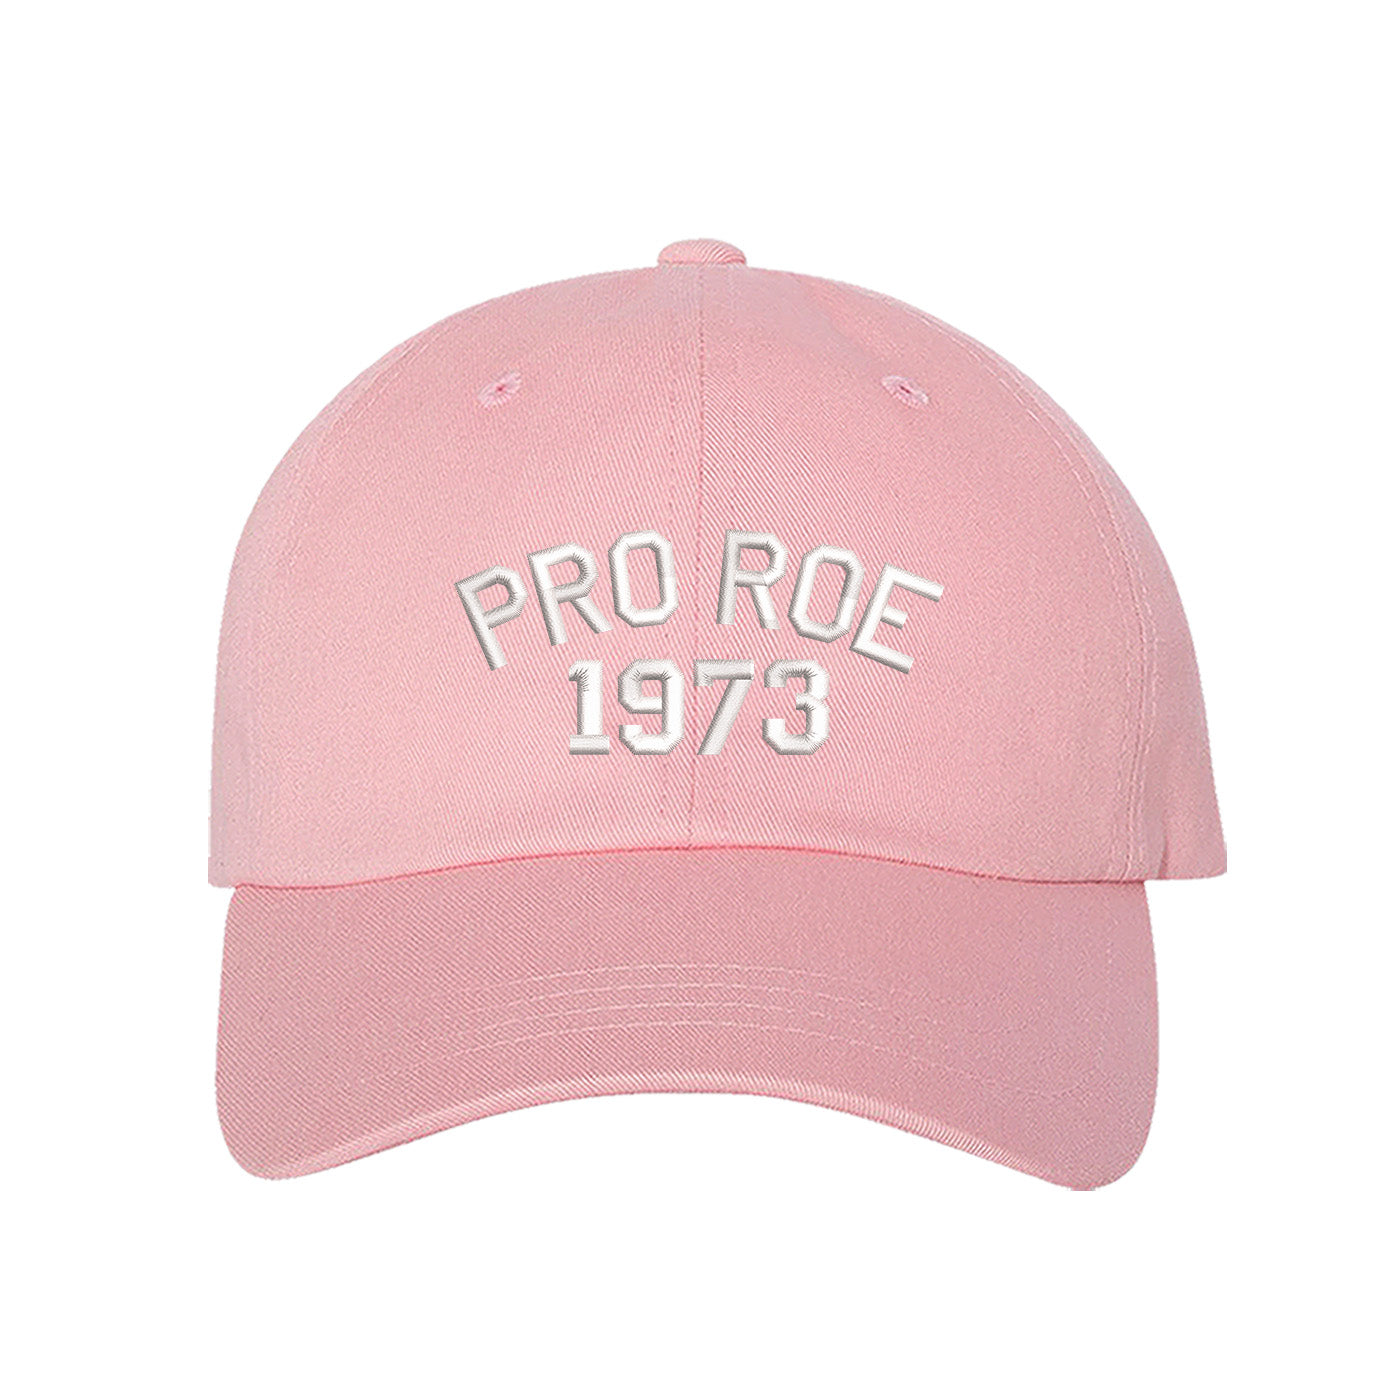 Pro Roe 1973 Pink Embroidered Baseball Cap - DSY Lifesetyle